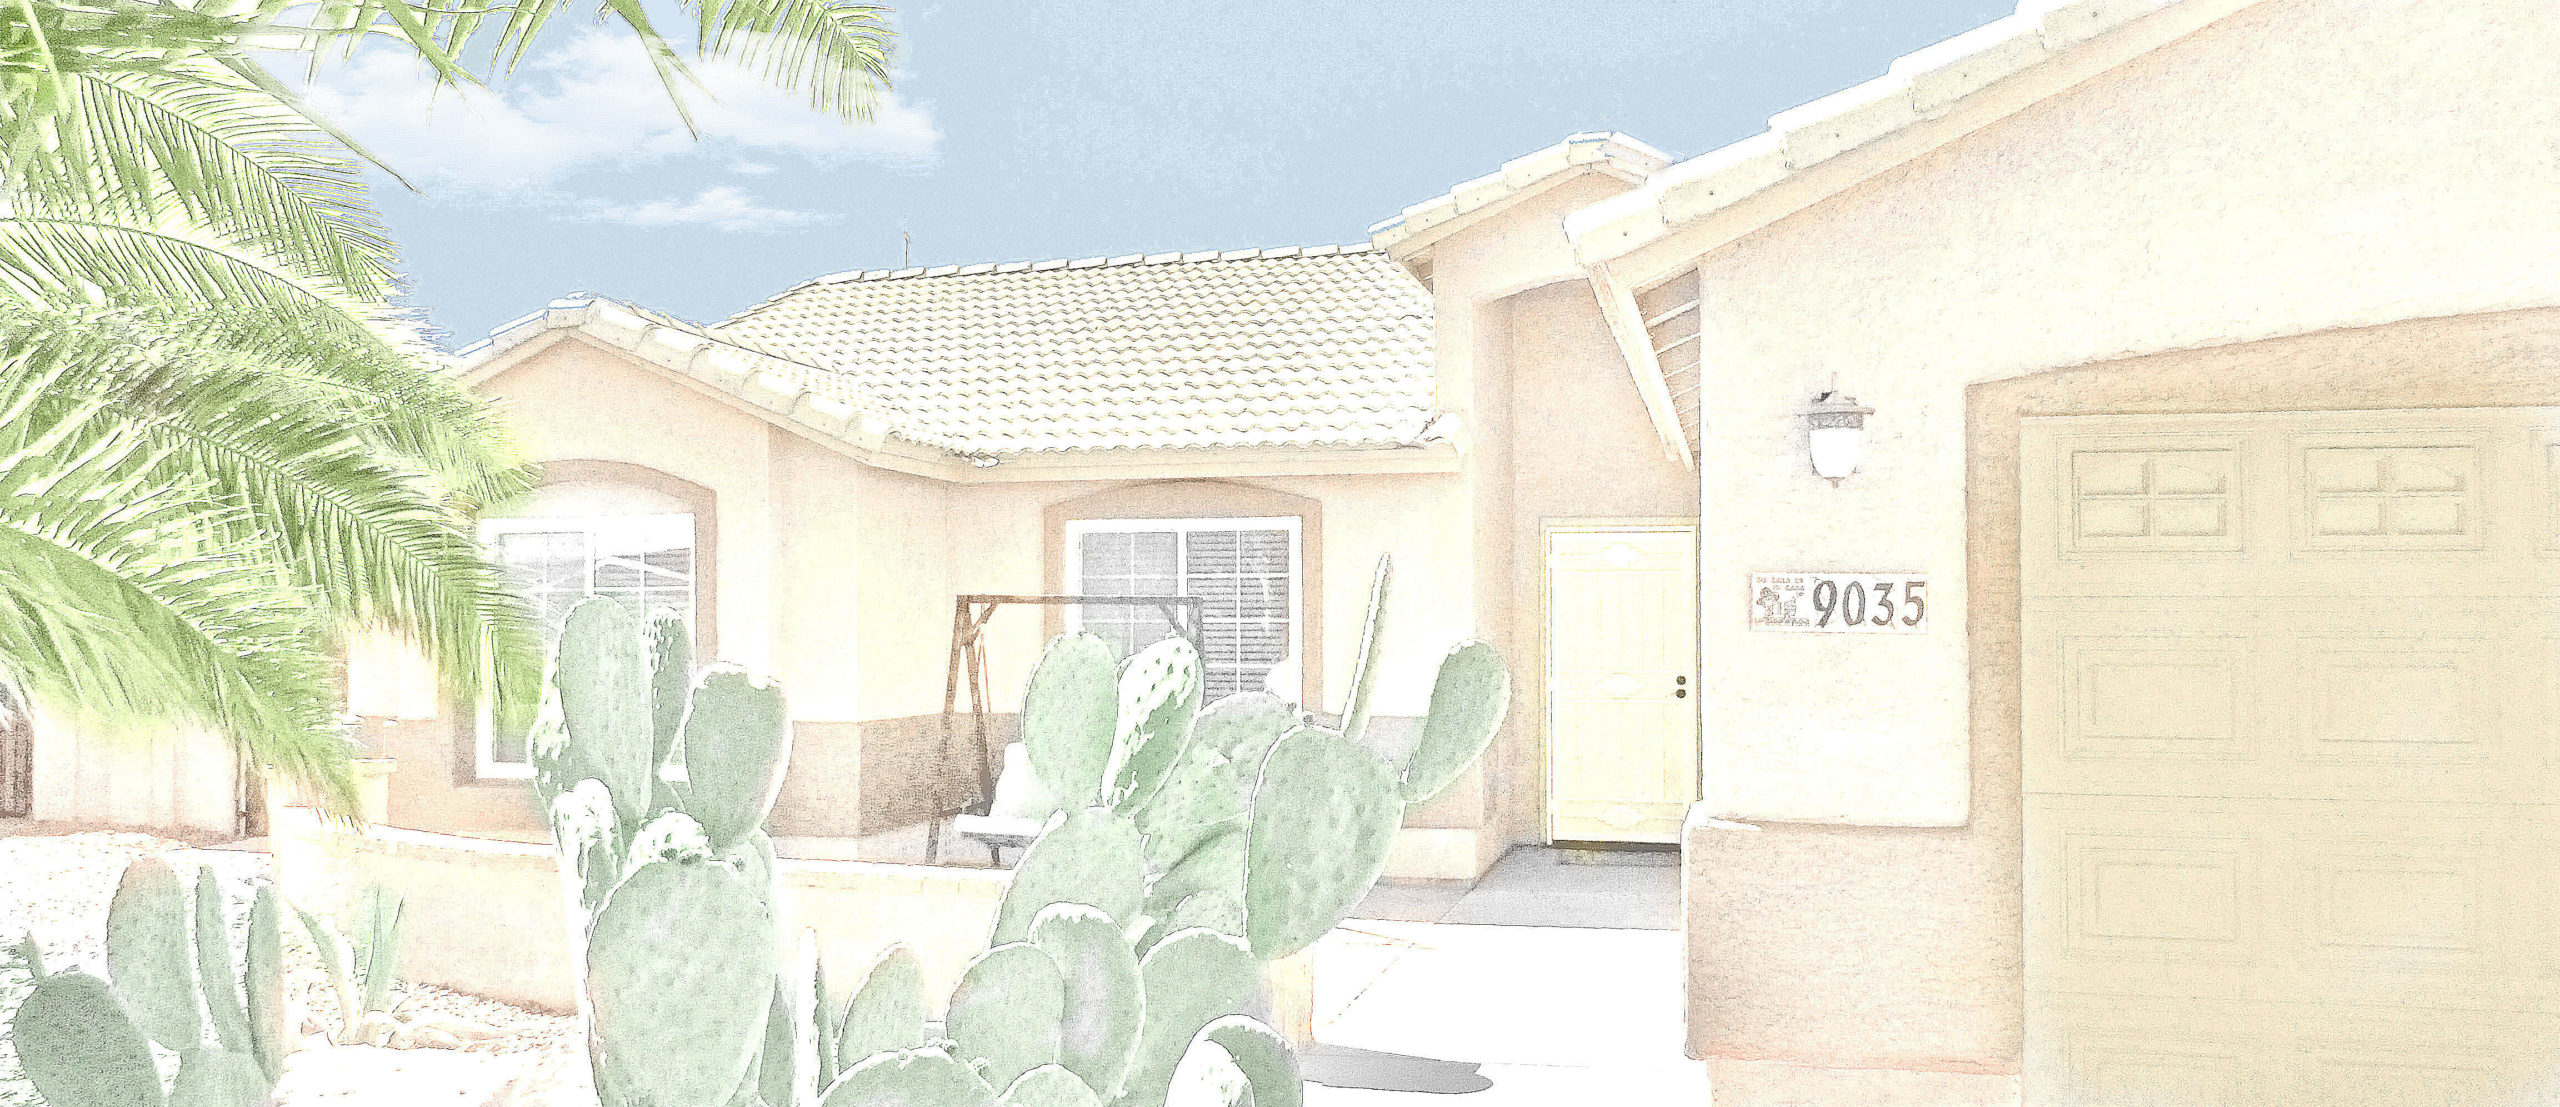 sketch of single story home with garage on right, large palm tree on left and cactus in front - 9035 W Reventon Dr, Arizona City, AZ - header - Beautiful 4 Bedroom home for sale - Bill Salvatore, Your Valley Property Team - Arizona Elite Properties 602-999-0952